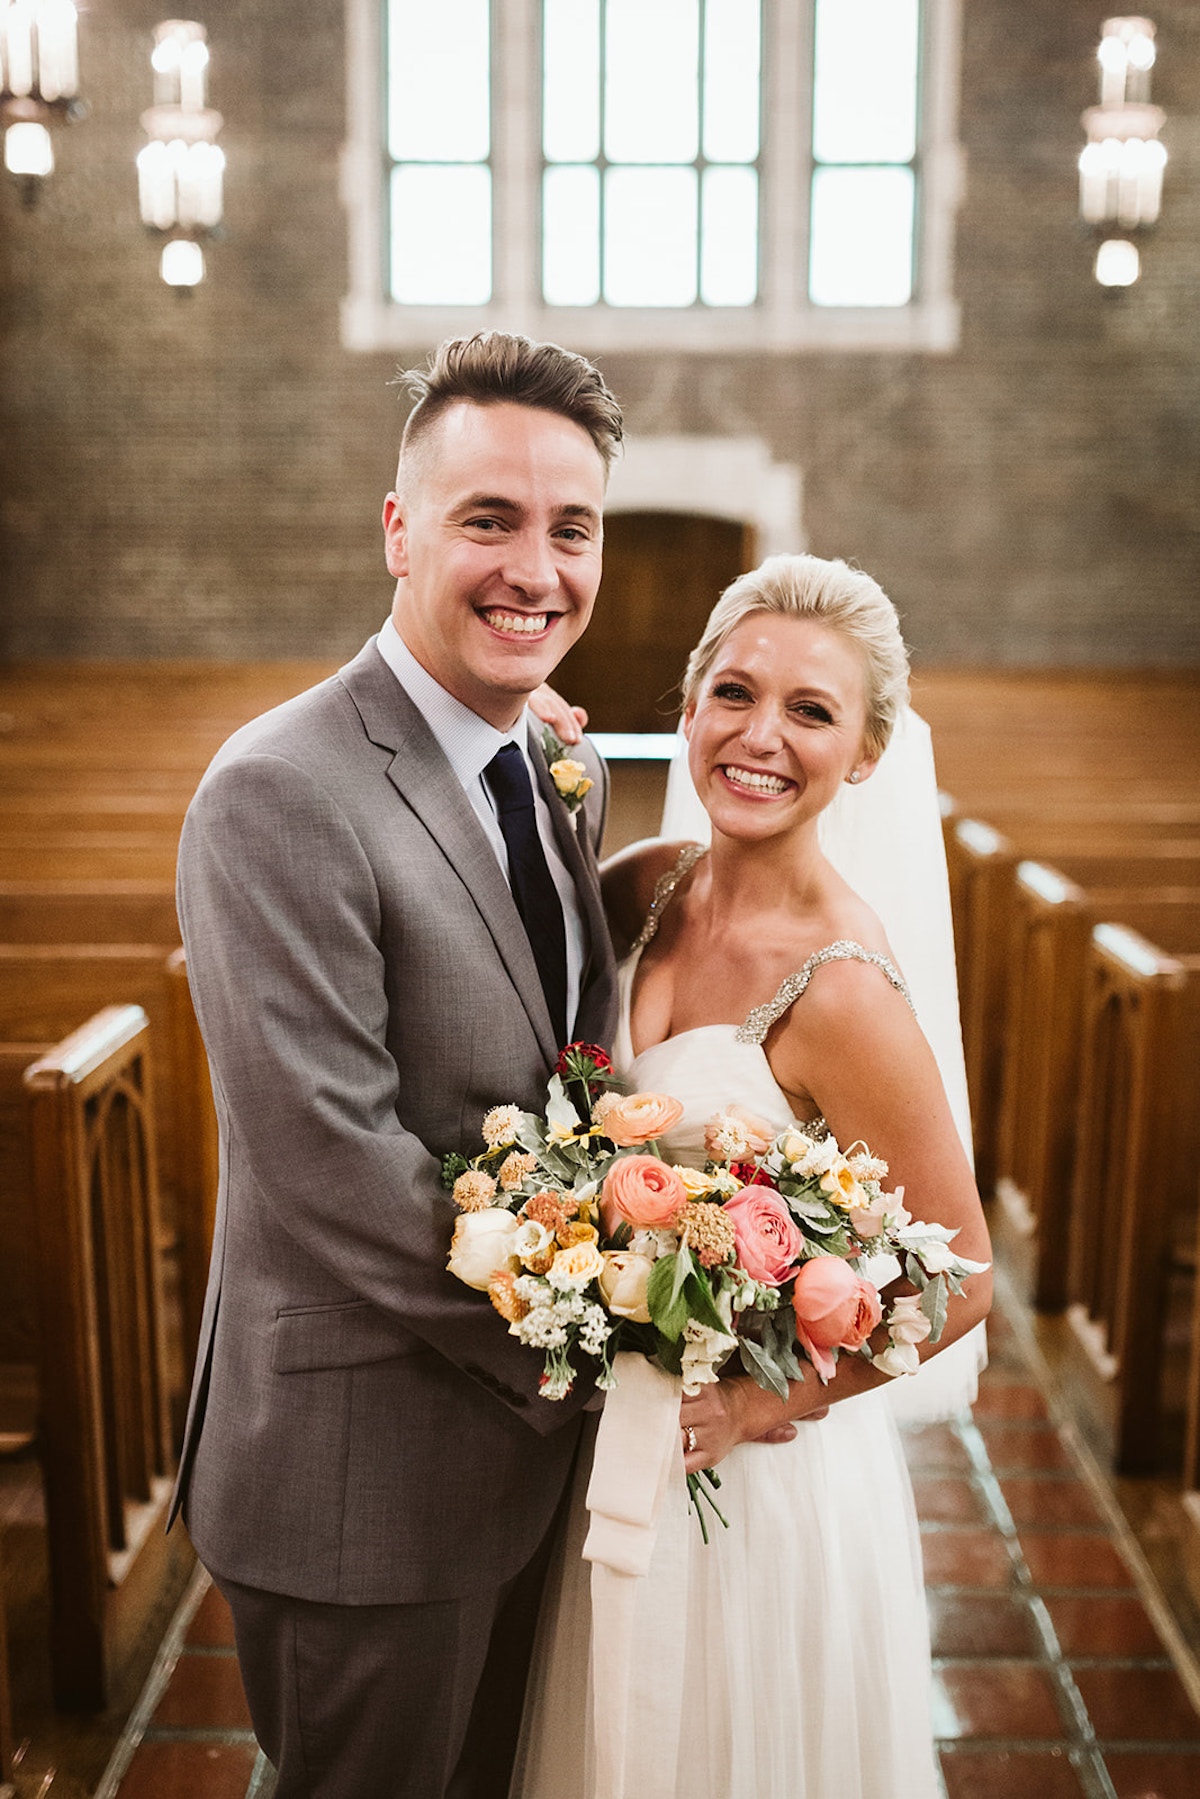 Bride and groom stand between wooden pews, a large window behind them. She holds a colorful pink, peach, and yellow bouquet.